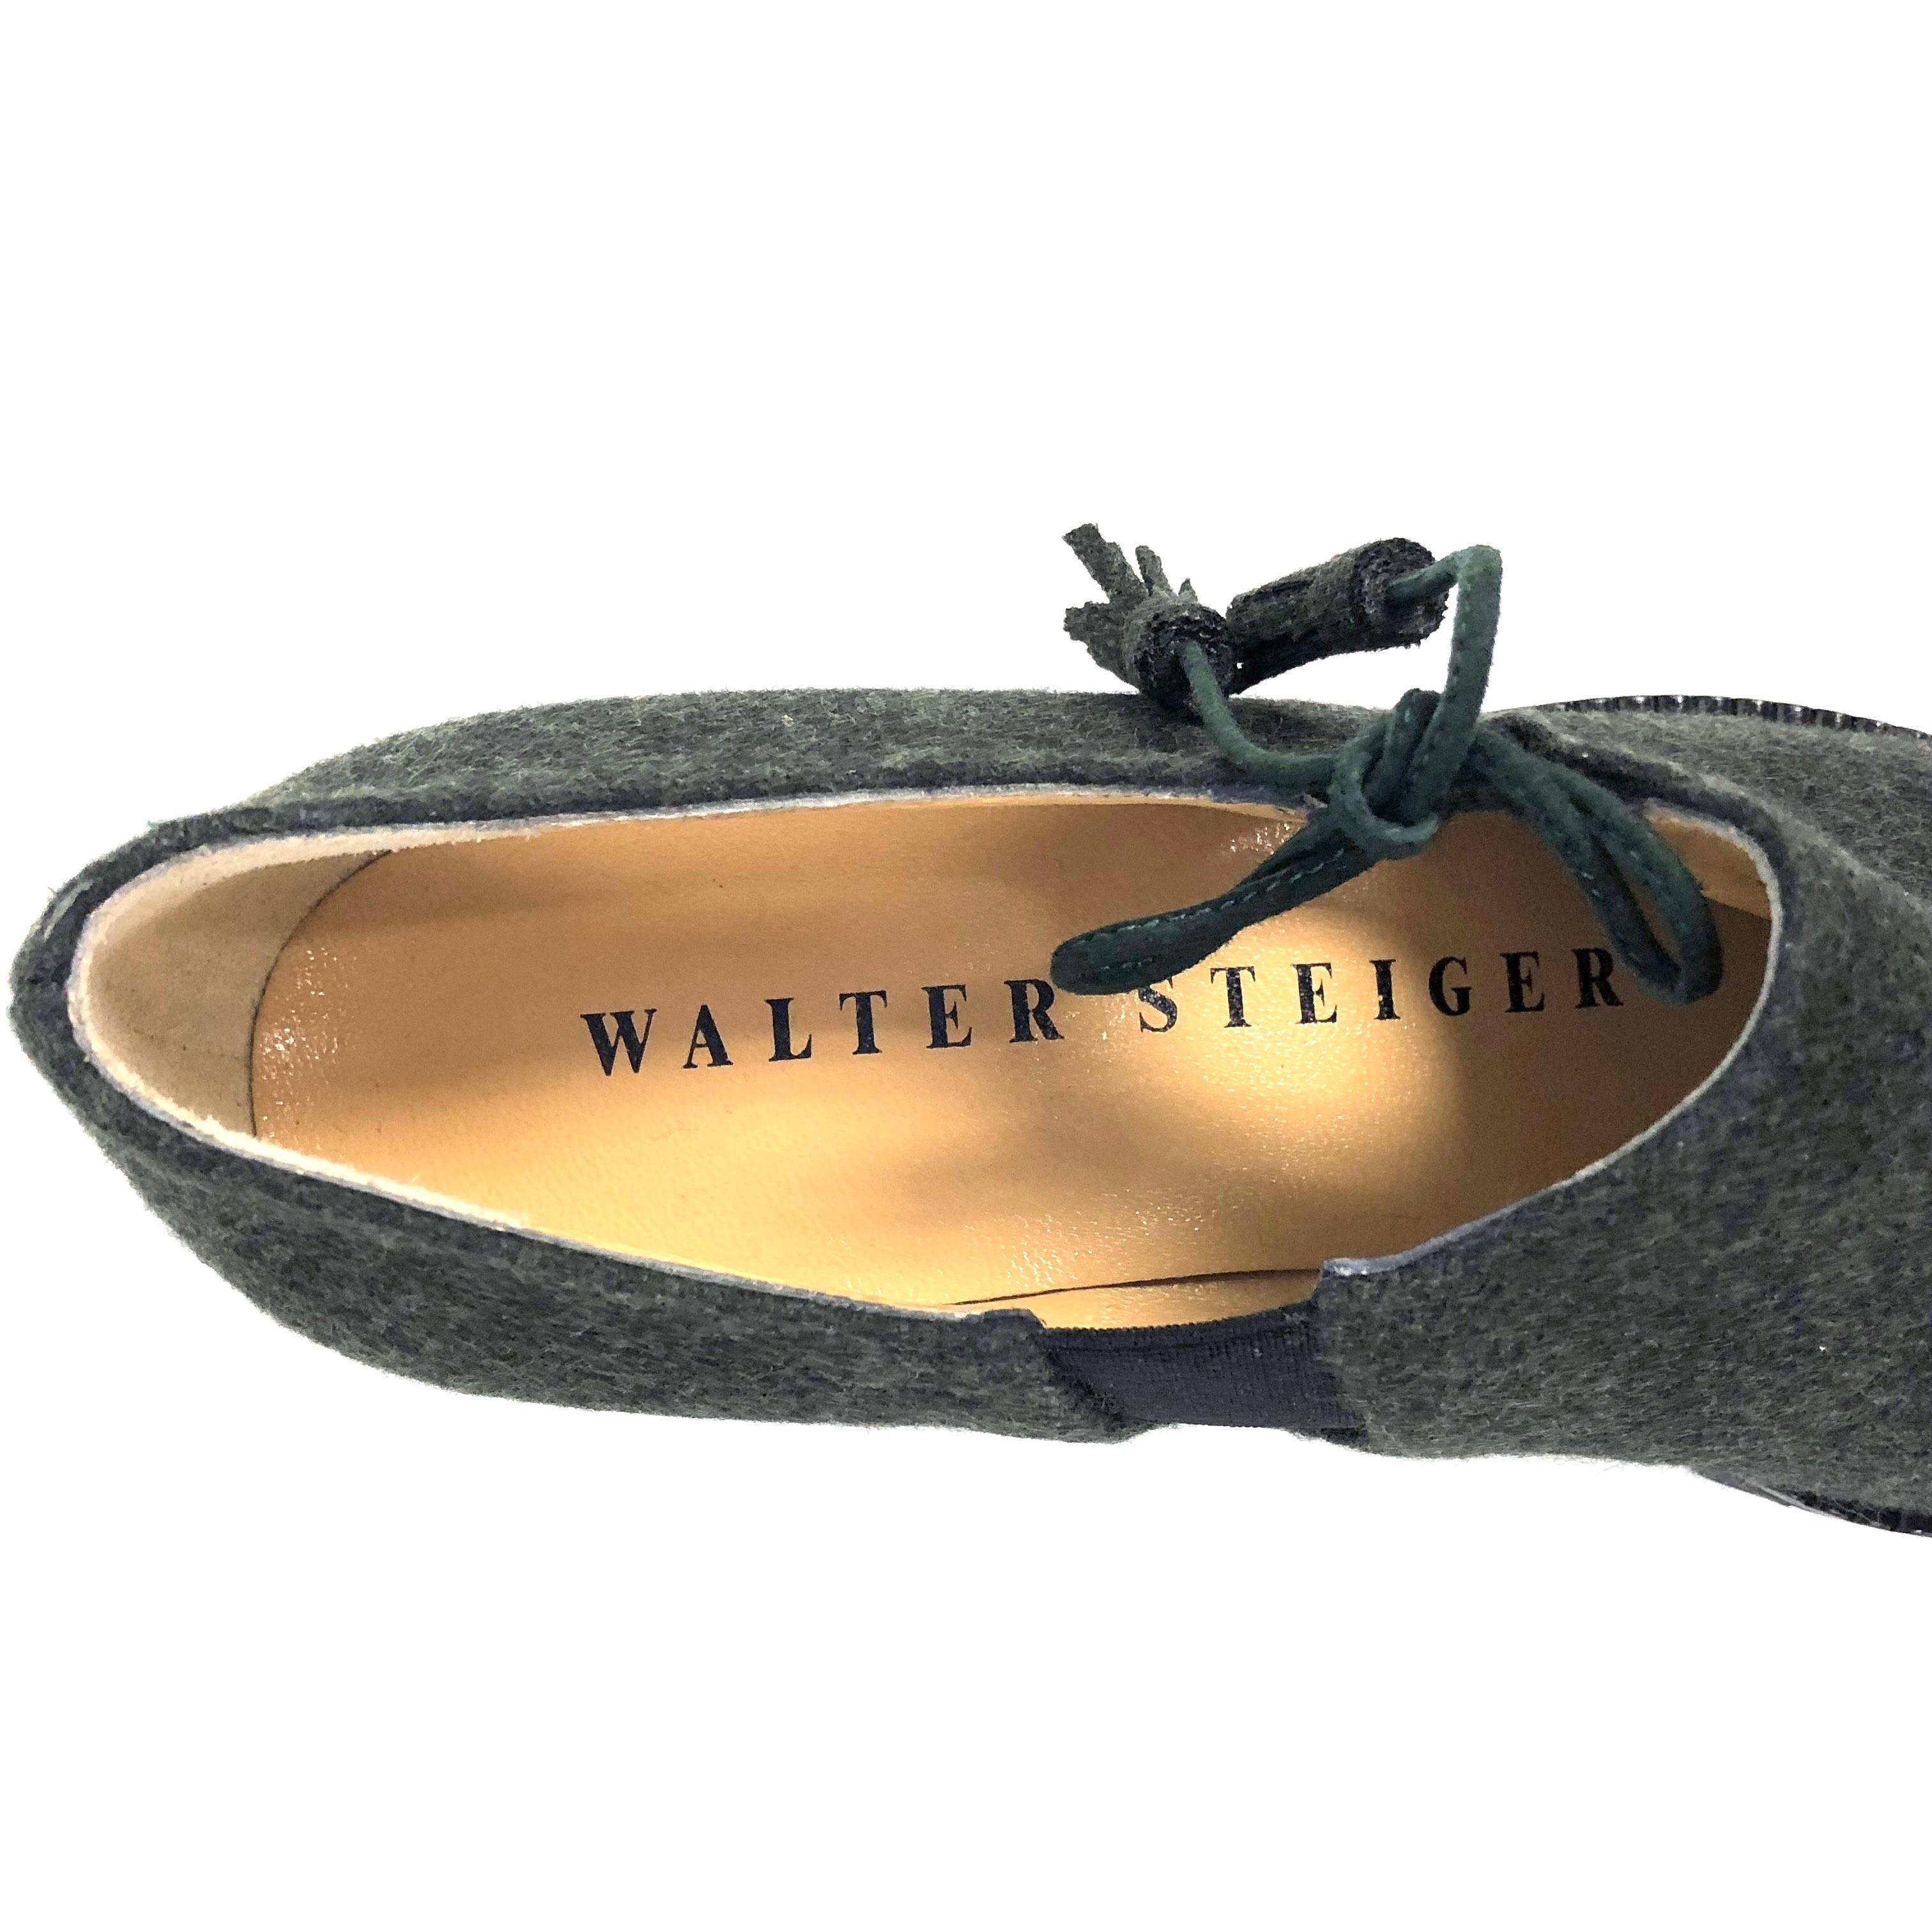 Walter Steiger hunter green wool and leather loafer with 1.5 inch low platfrom style heel and Ilga sole. 
Size 37 EU / US 7
Condition: New in box. 